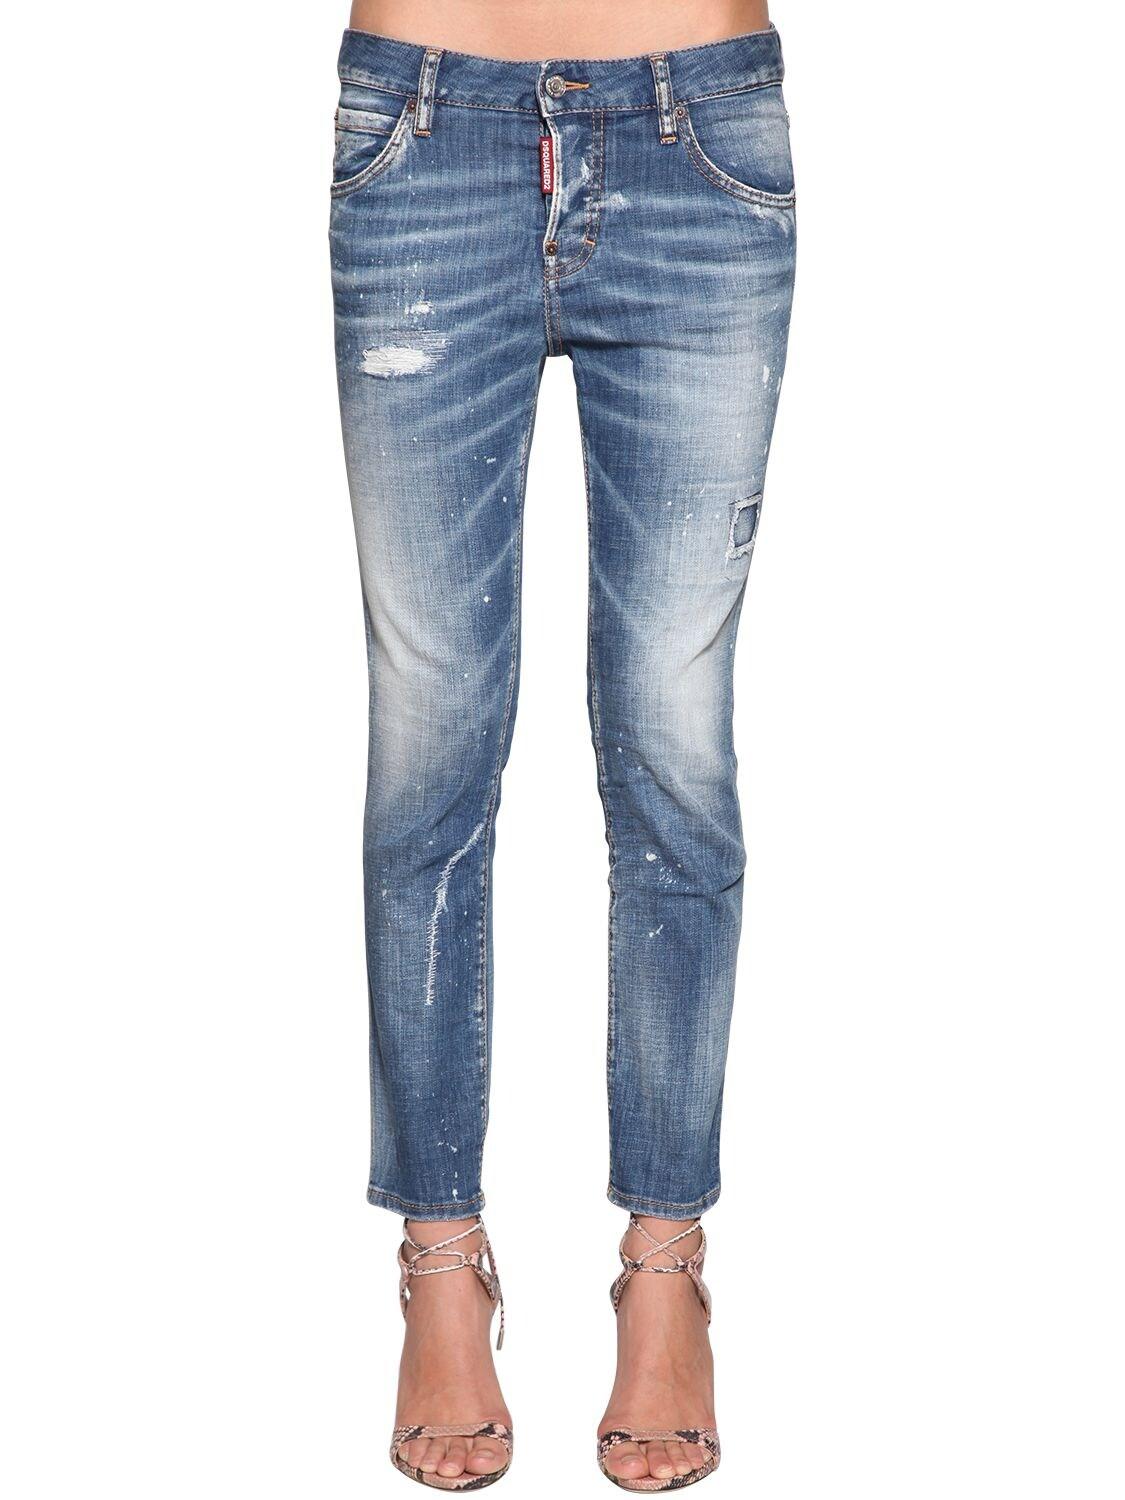 DSquared² Cool Girl Denim Jeans in Blue - Lyst